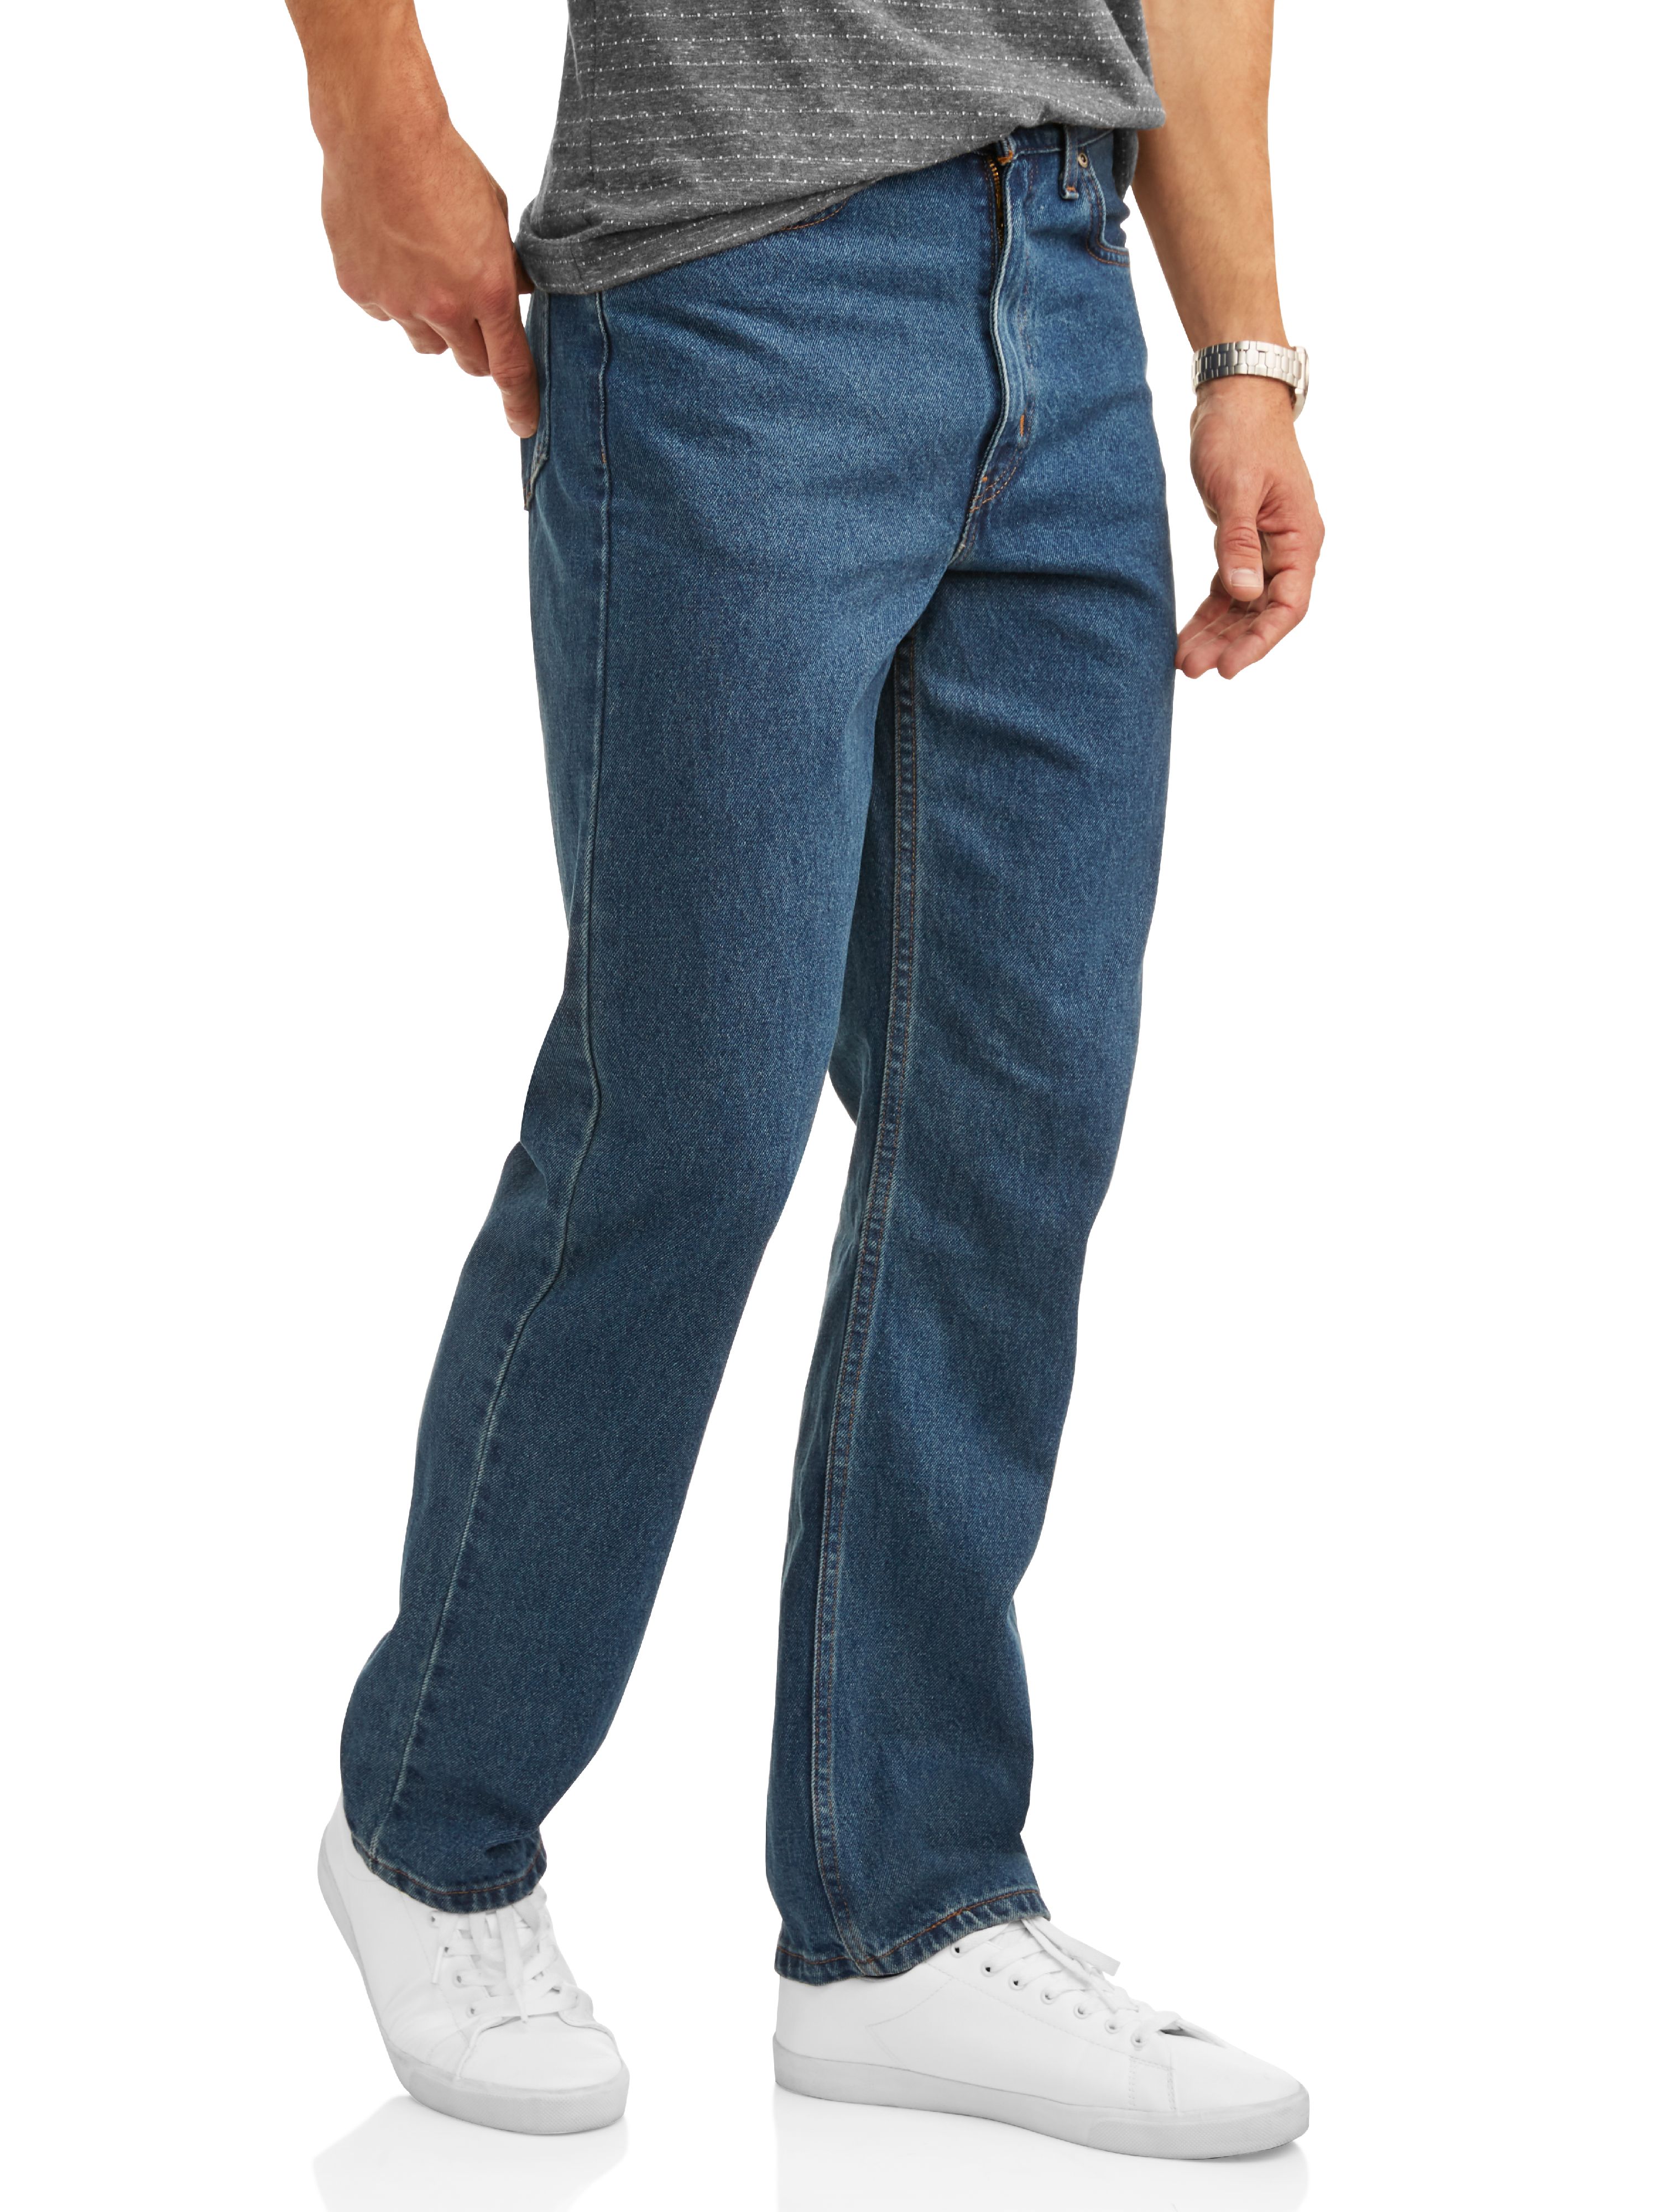 George Men's and Big Men's 100% Cotton Relaxed Fit Jeans - image 3 of 6